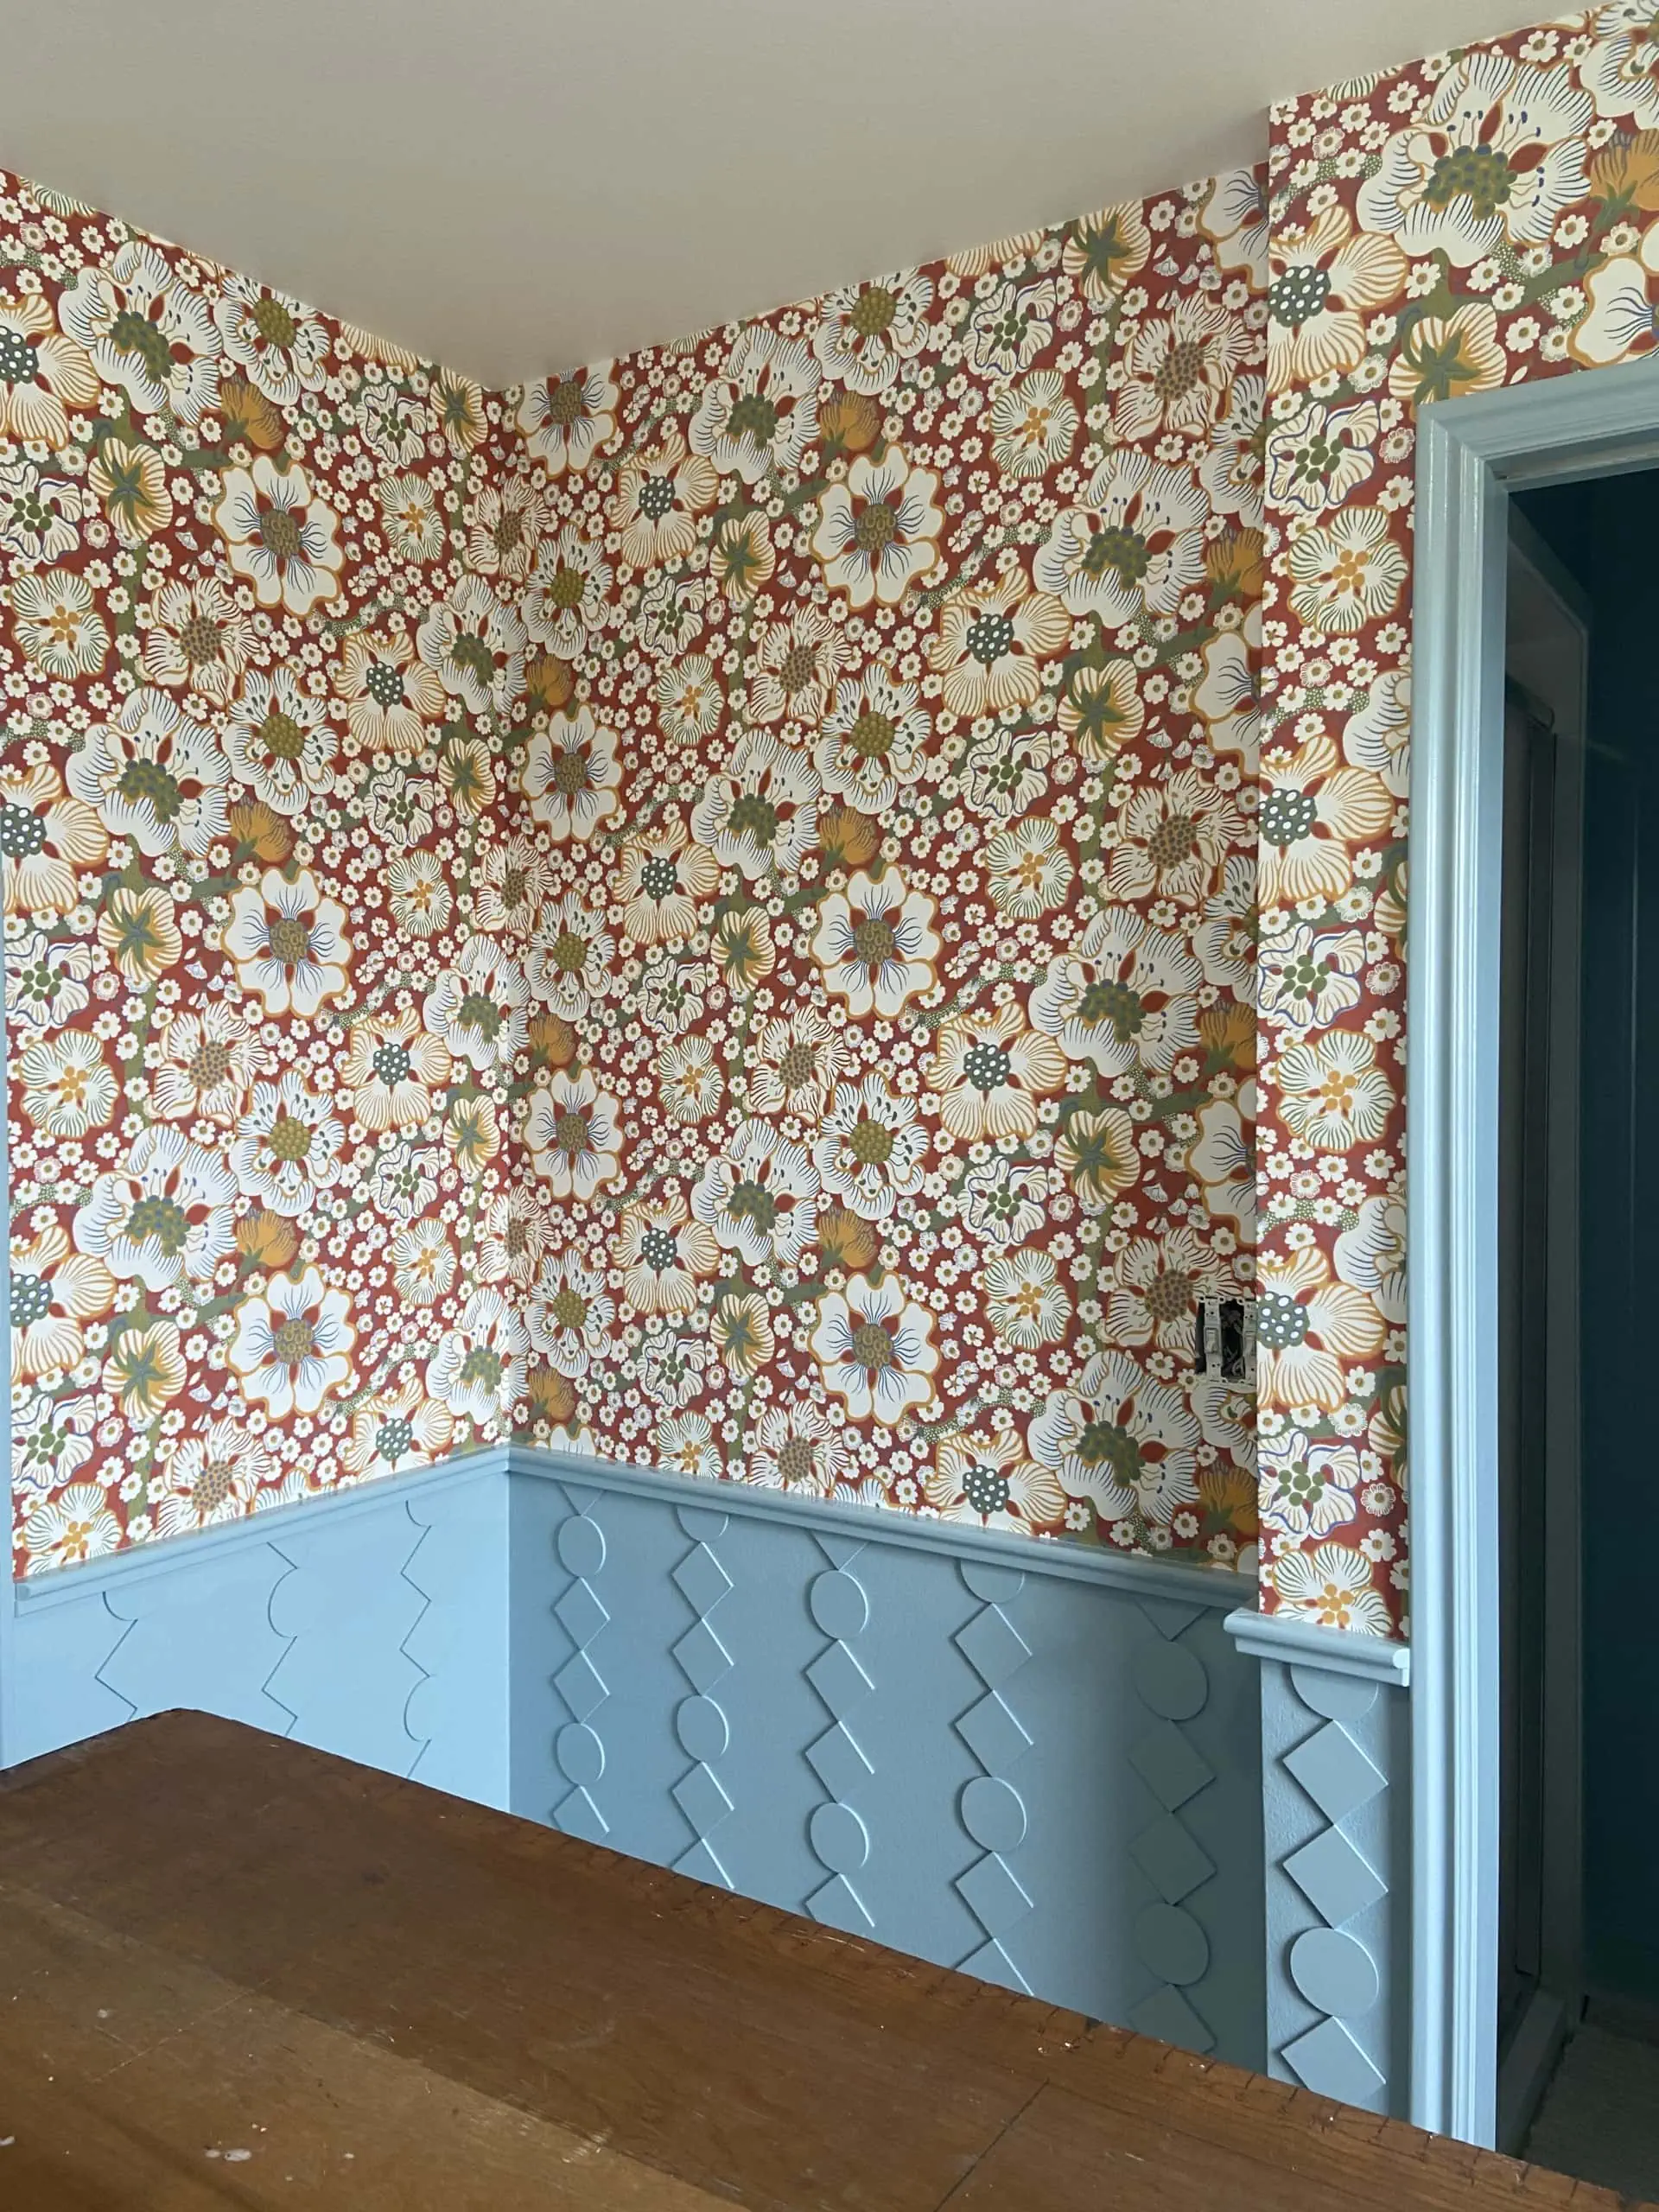 Interior shot of a room with red floral wallpaper and blue custom wainscoting.